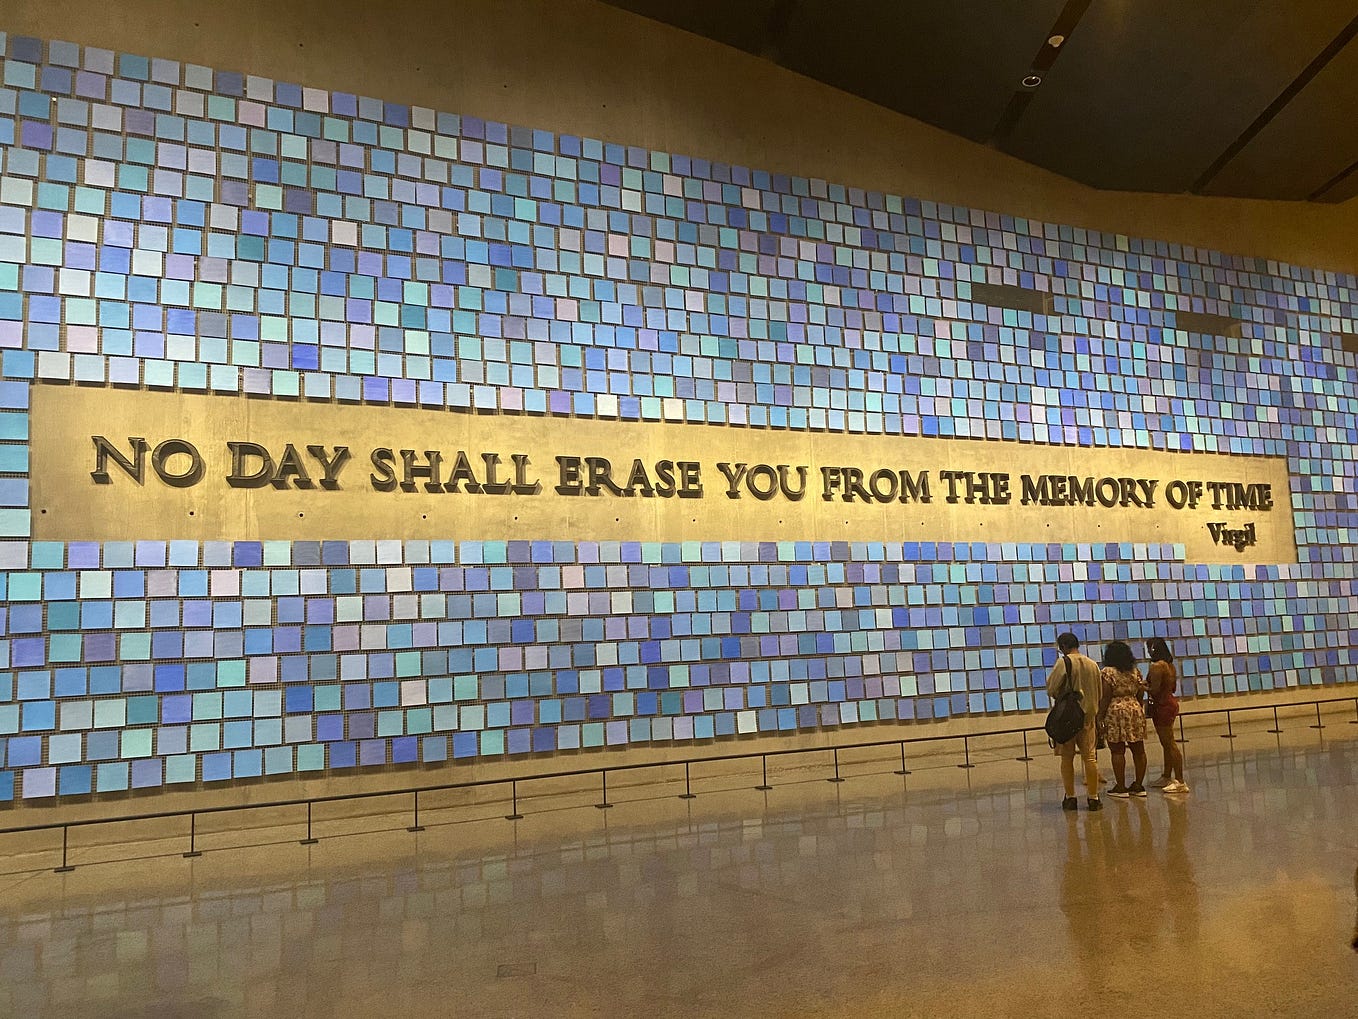 No Day Shall Erase You From the Memory of Time installation at the 9/11 Memorial